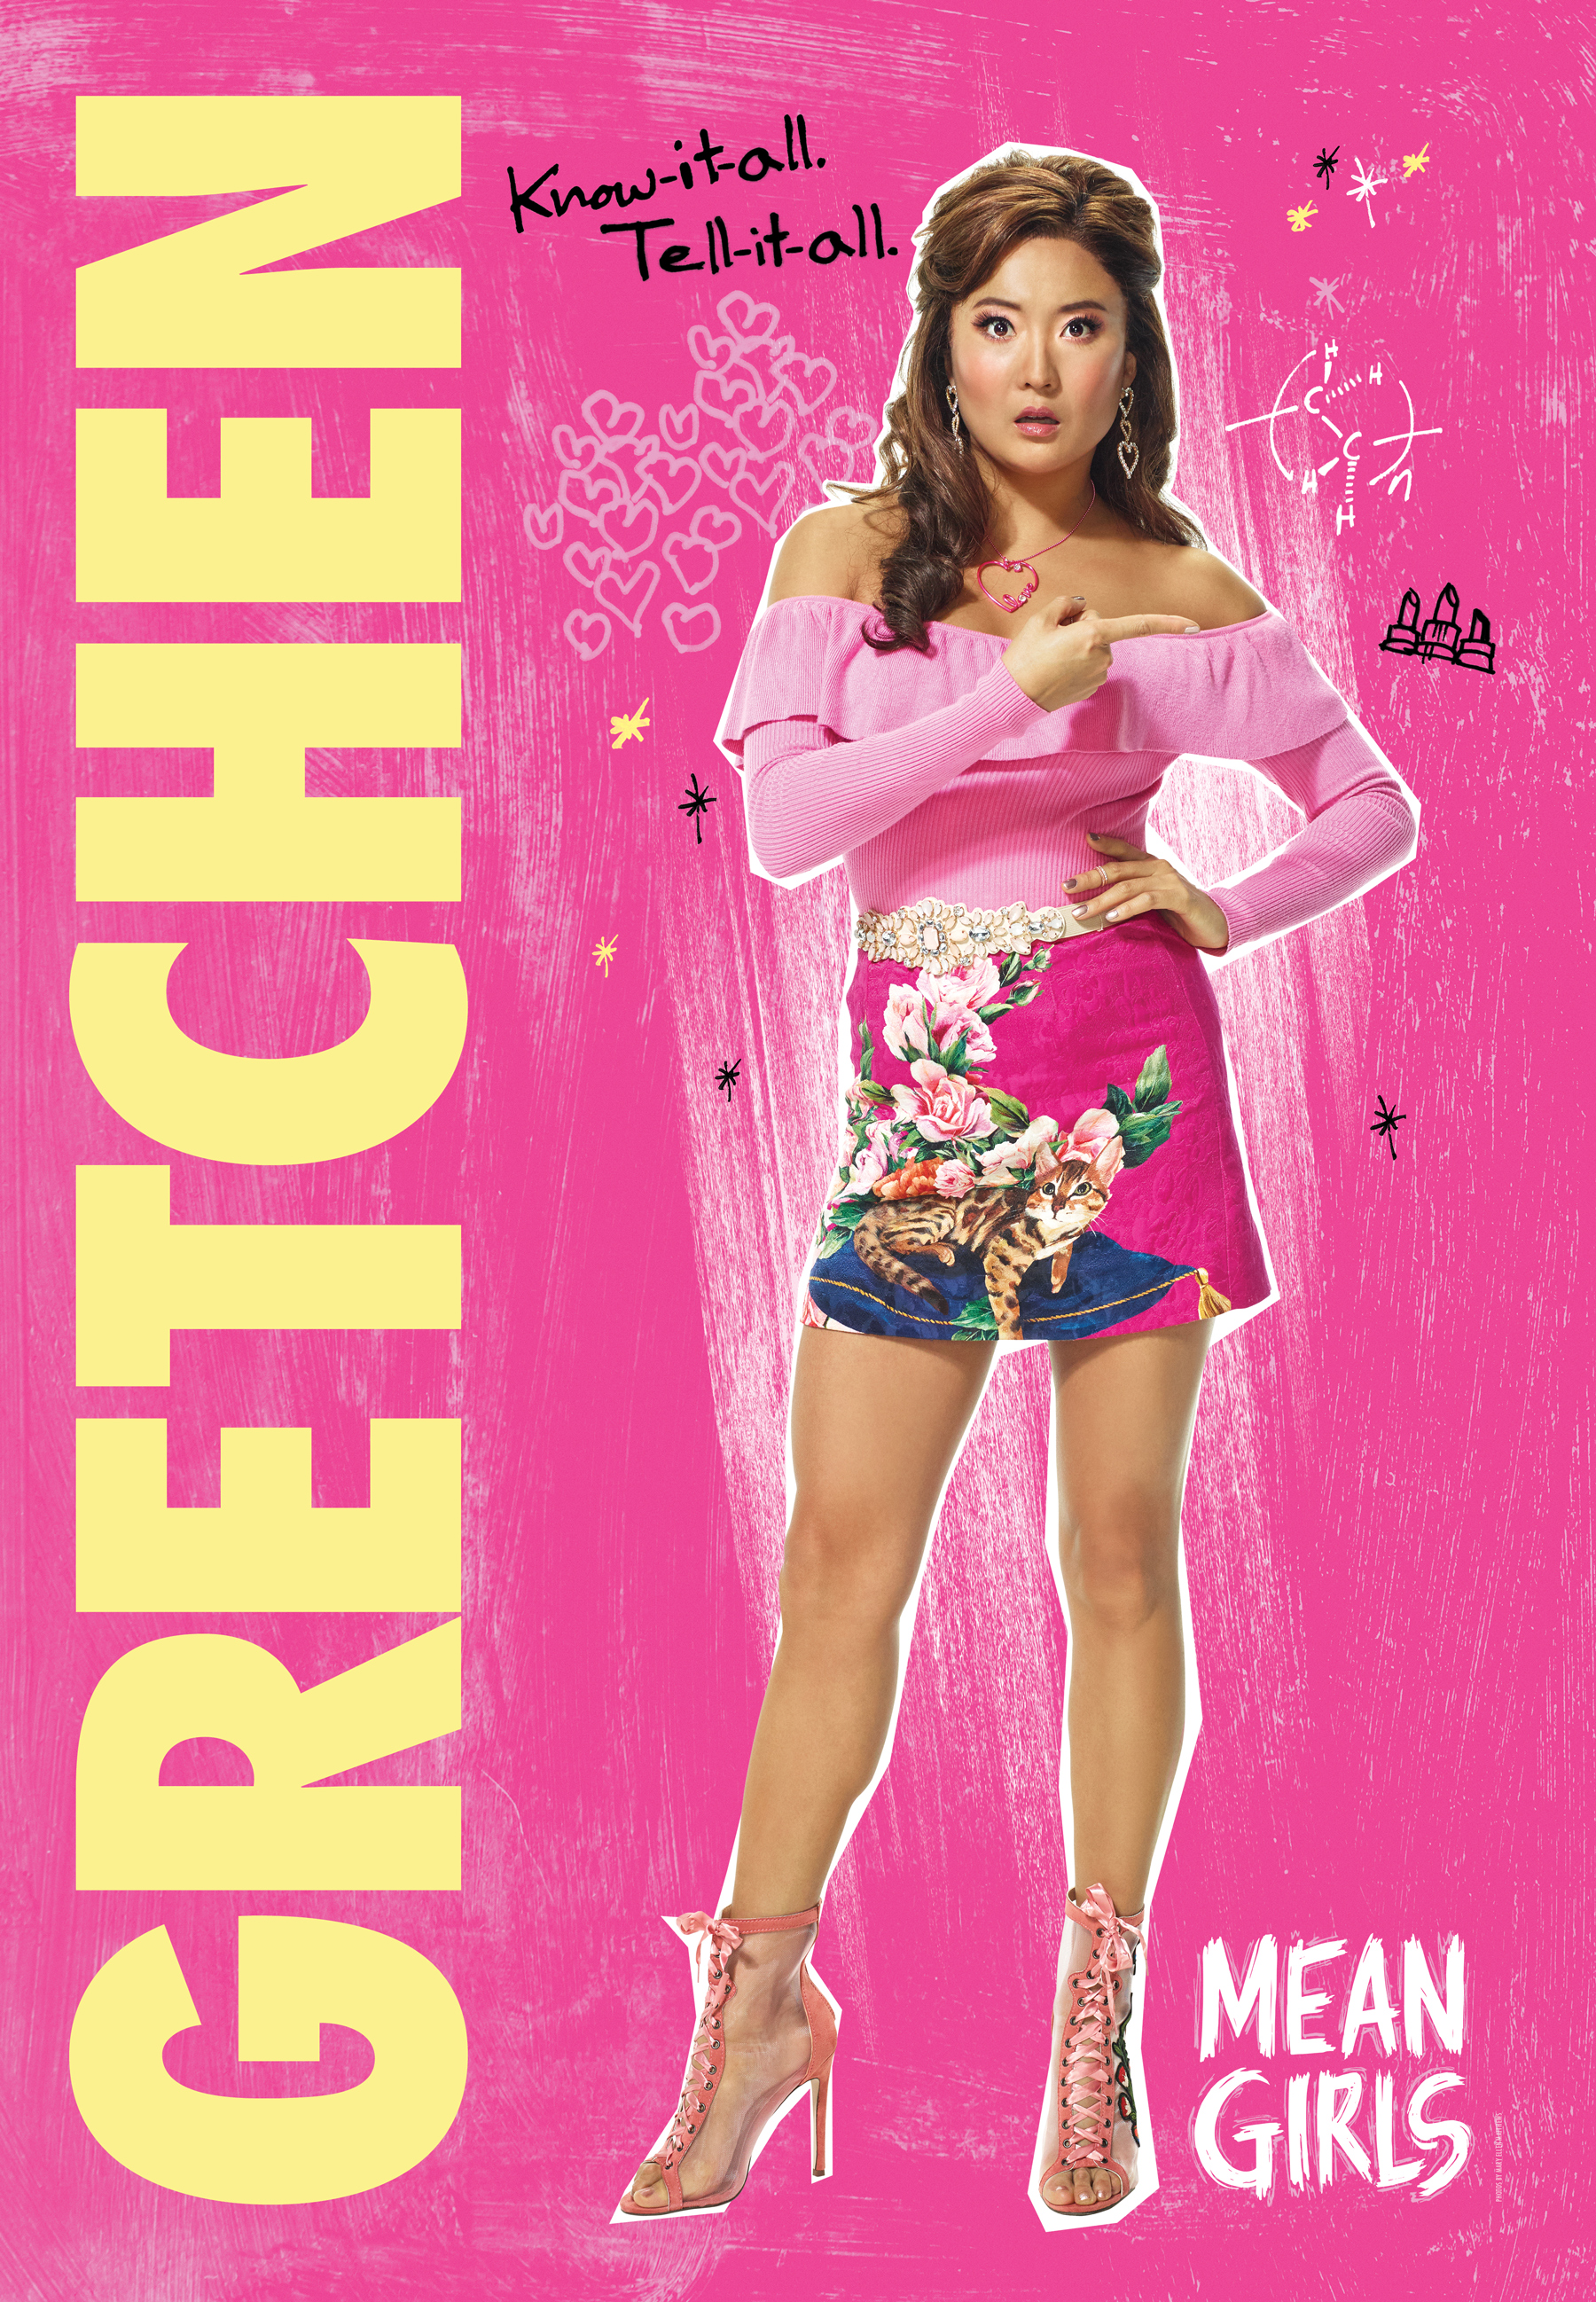 Get the Perfect Gretchen Wieners Costume for Mean Girls the Musical!